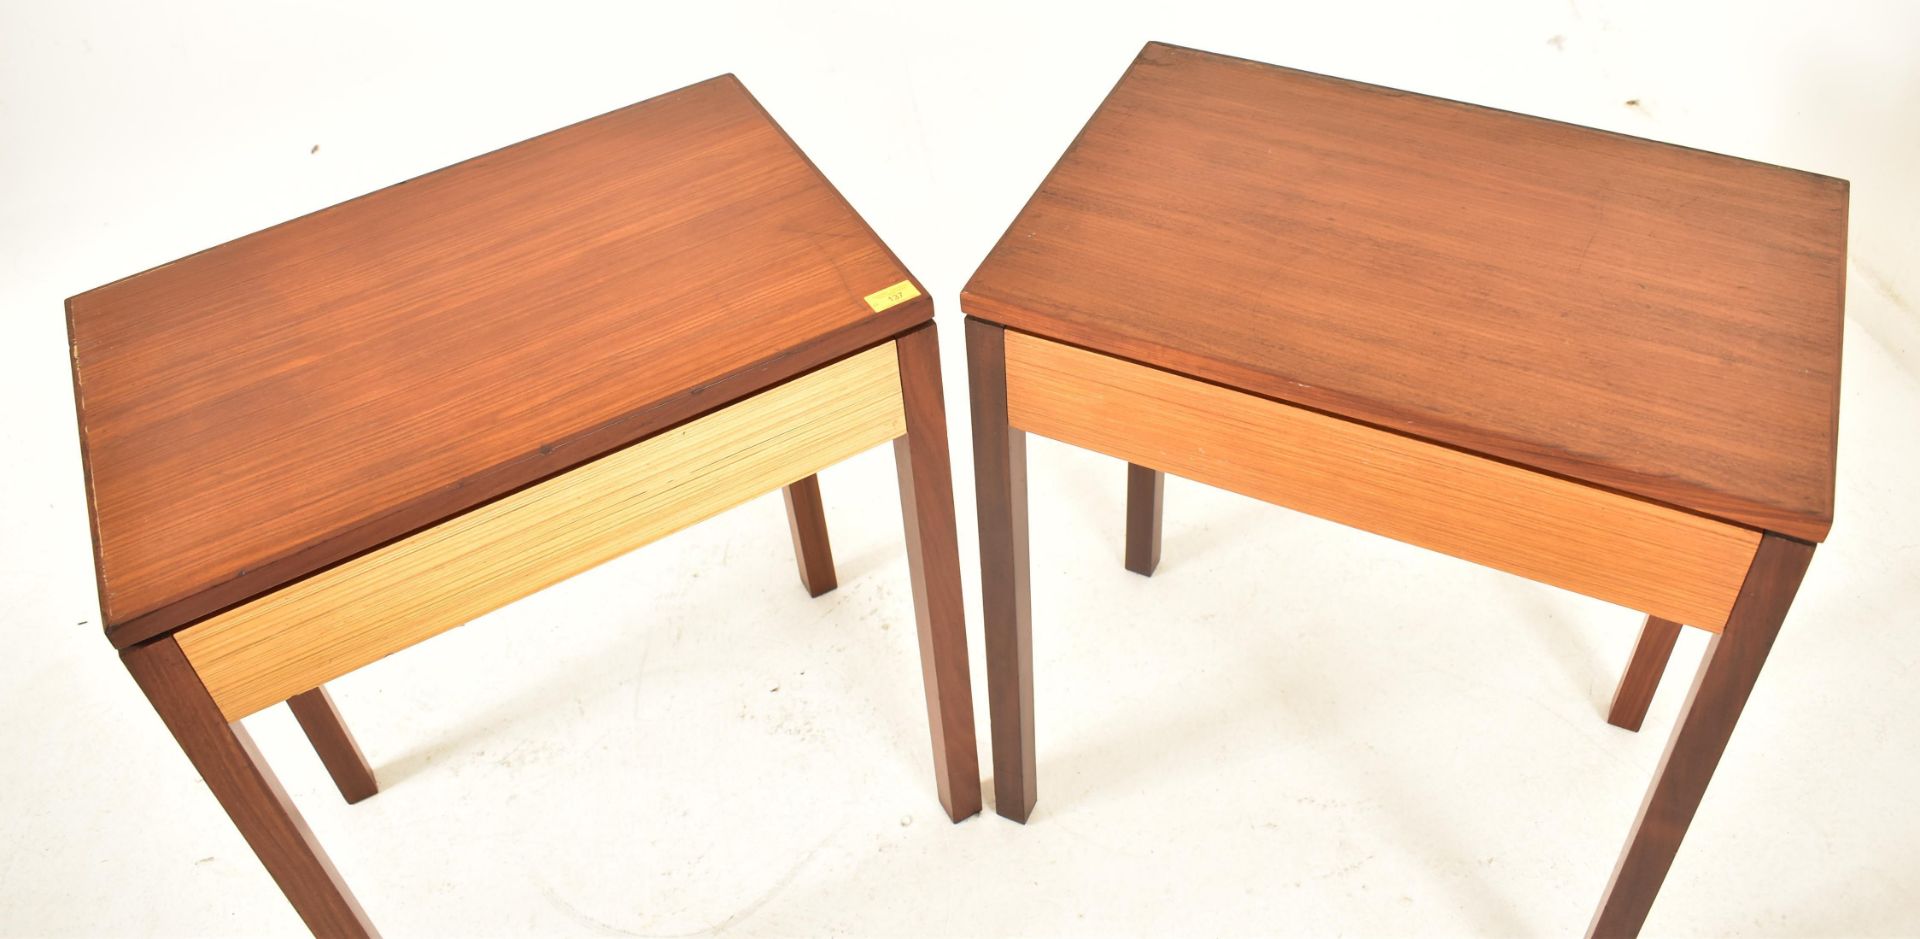 BRITISH MODERN DESIGN - PAIR TEAK OCCASSIONAL SIDE TABLES - Image 2 of 4